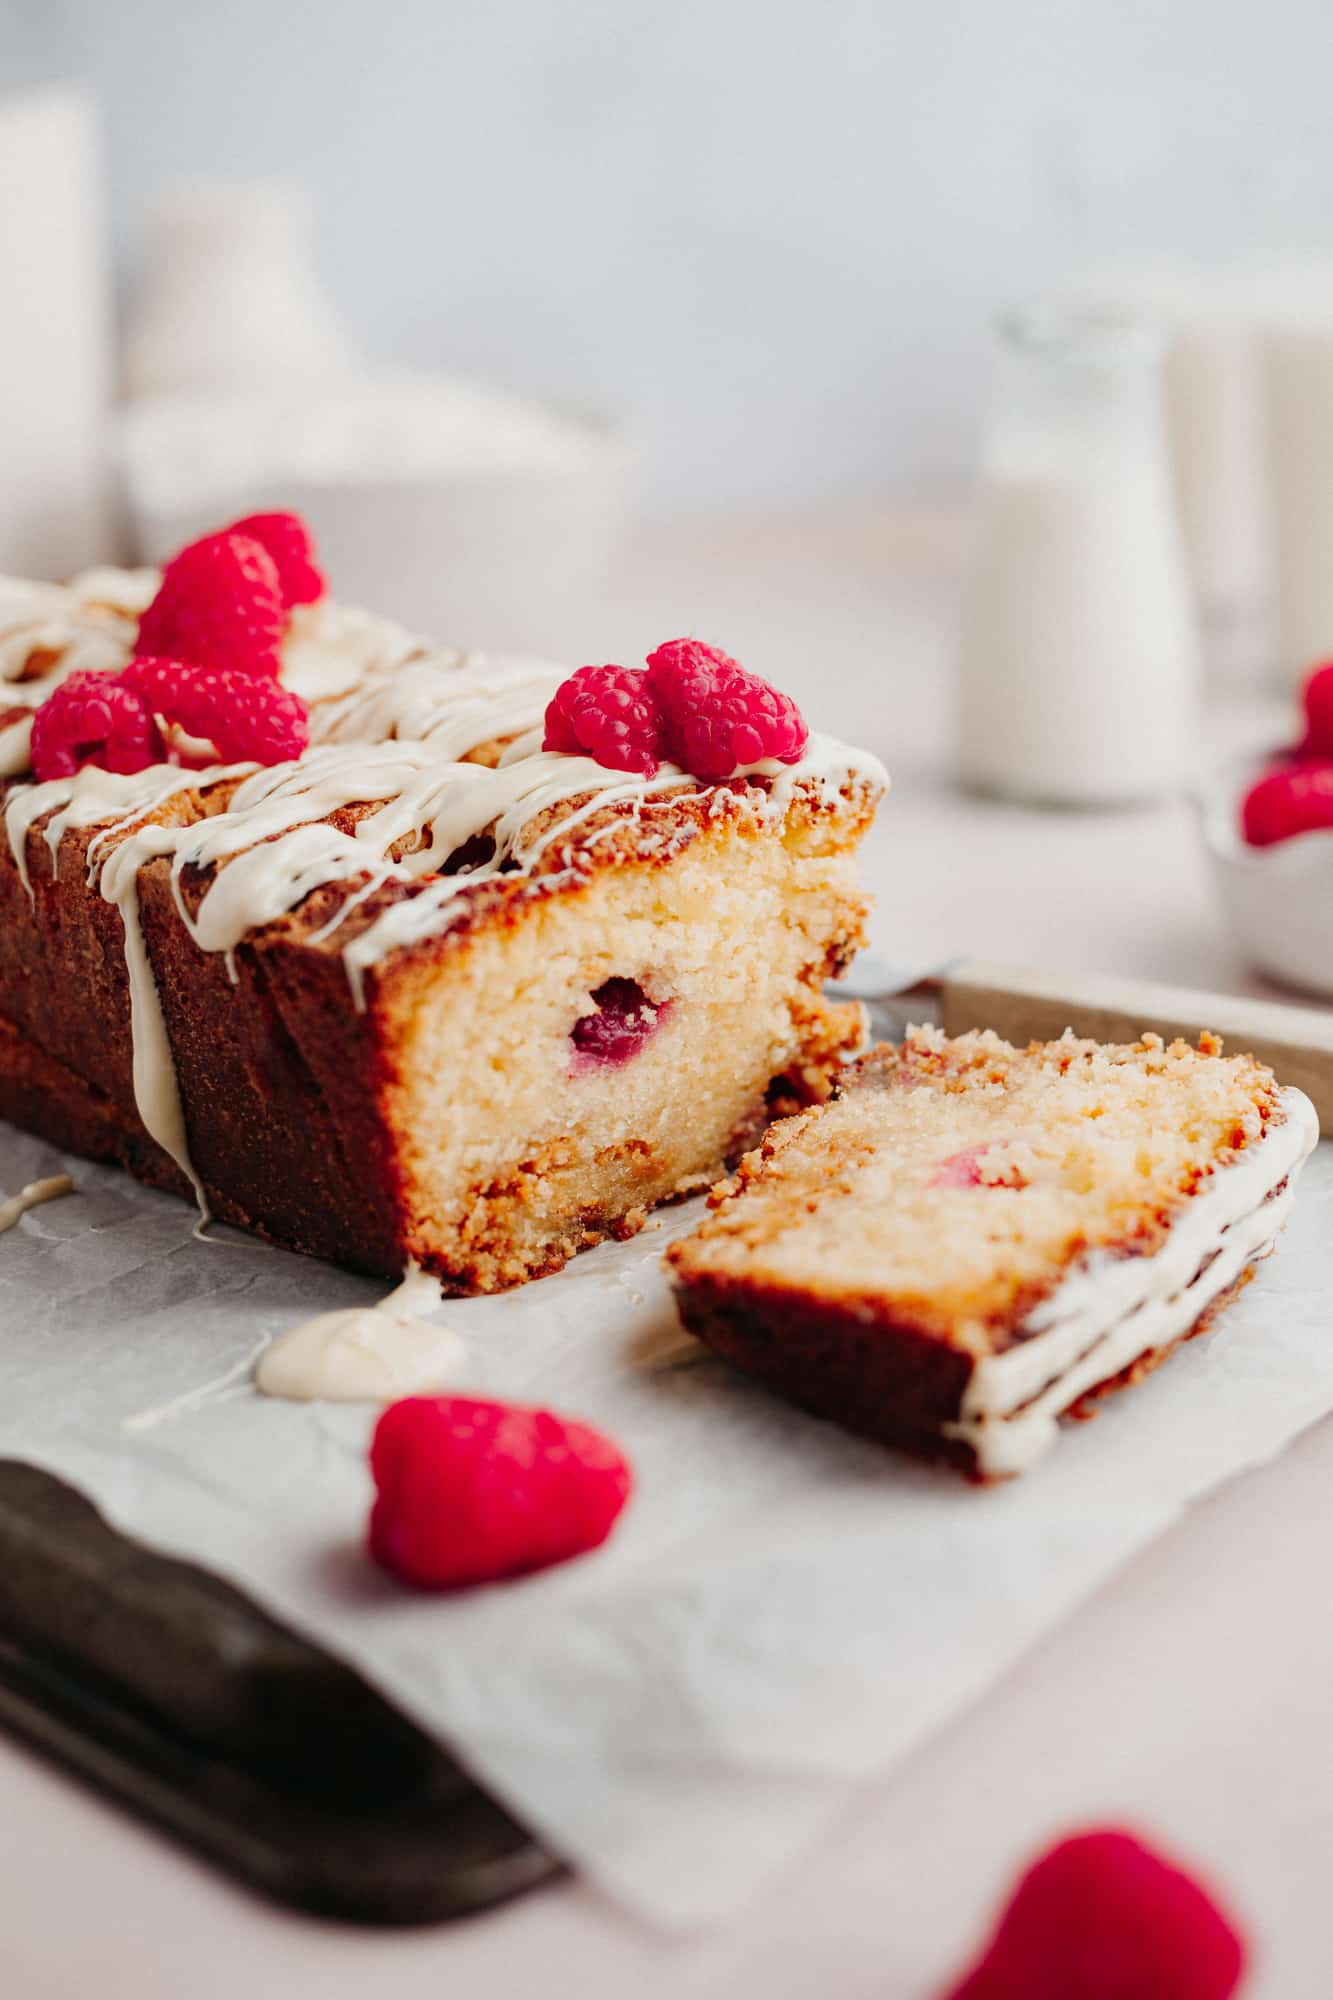 A raspberry and white chocolate loaf cake topped with white chocolate drizzle and fresh raspberries. One slice is cut.